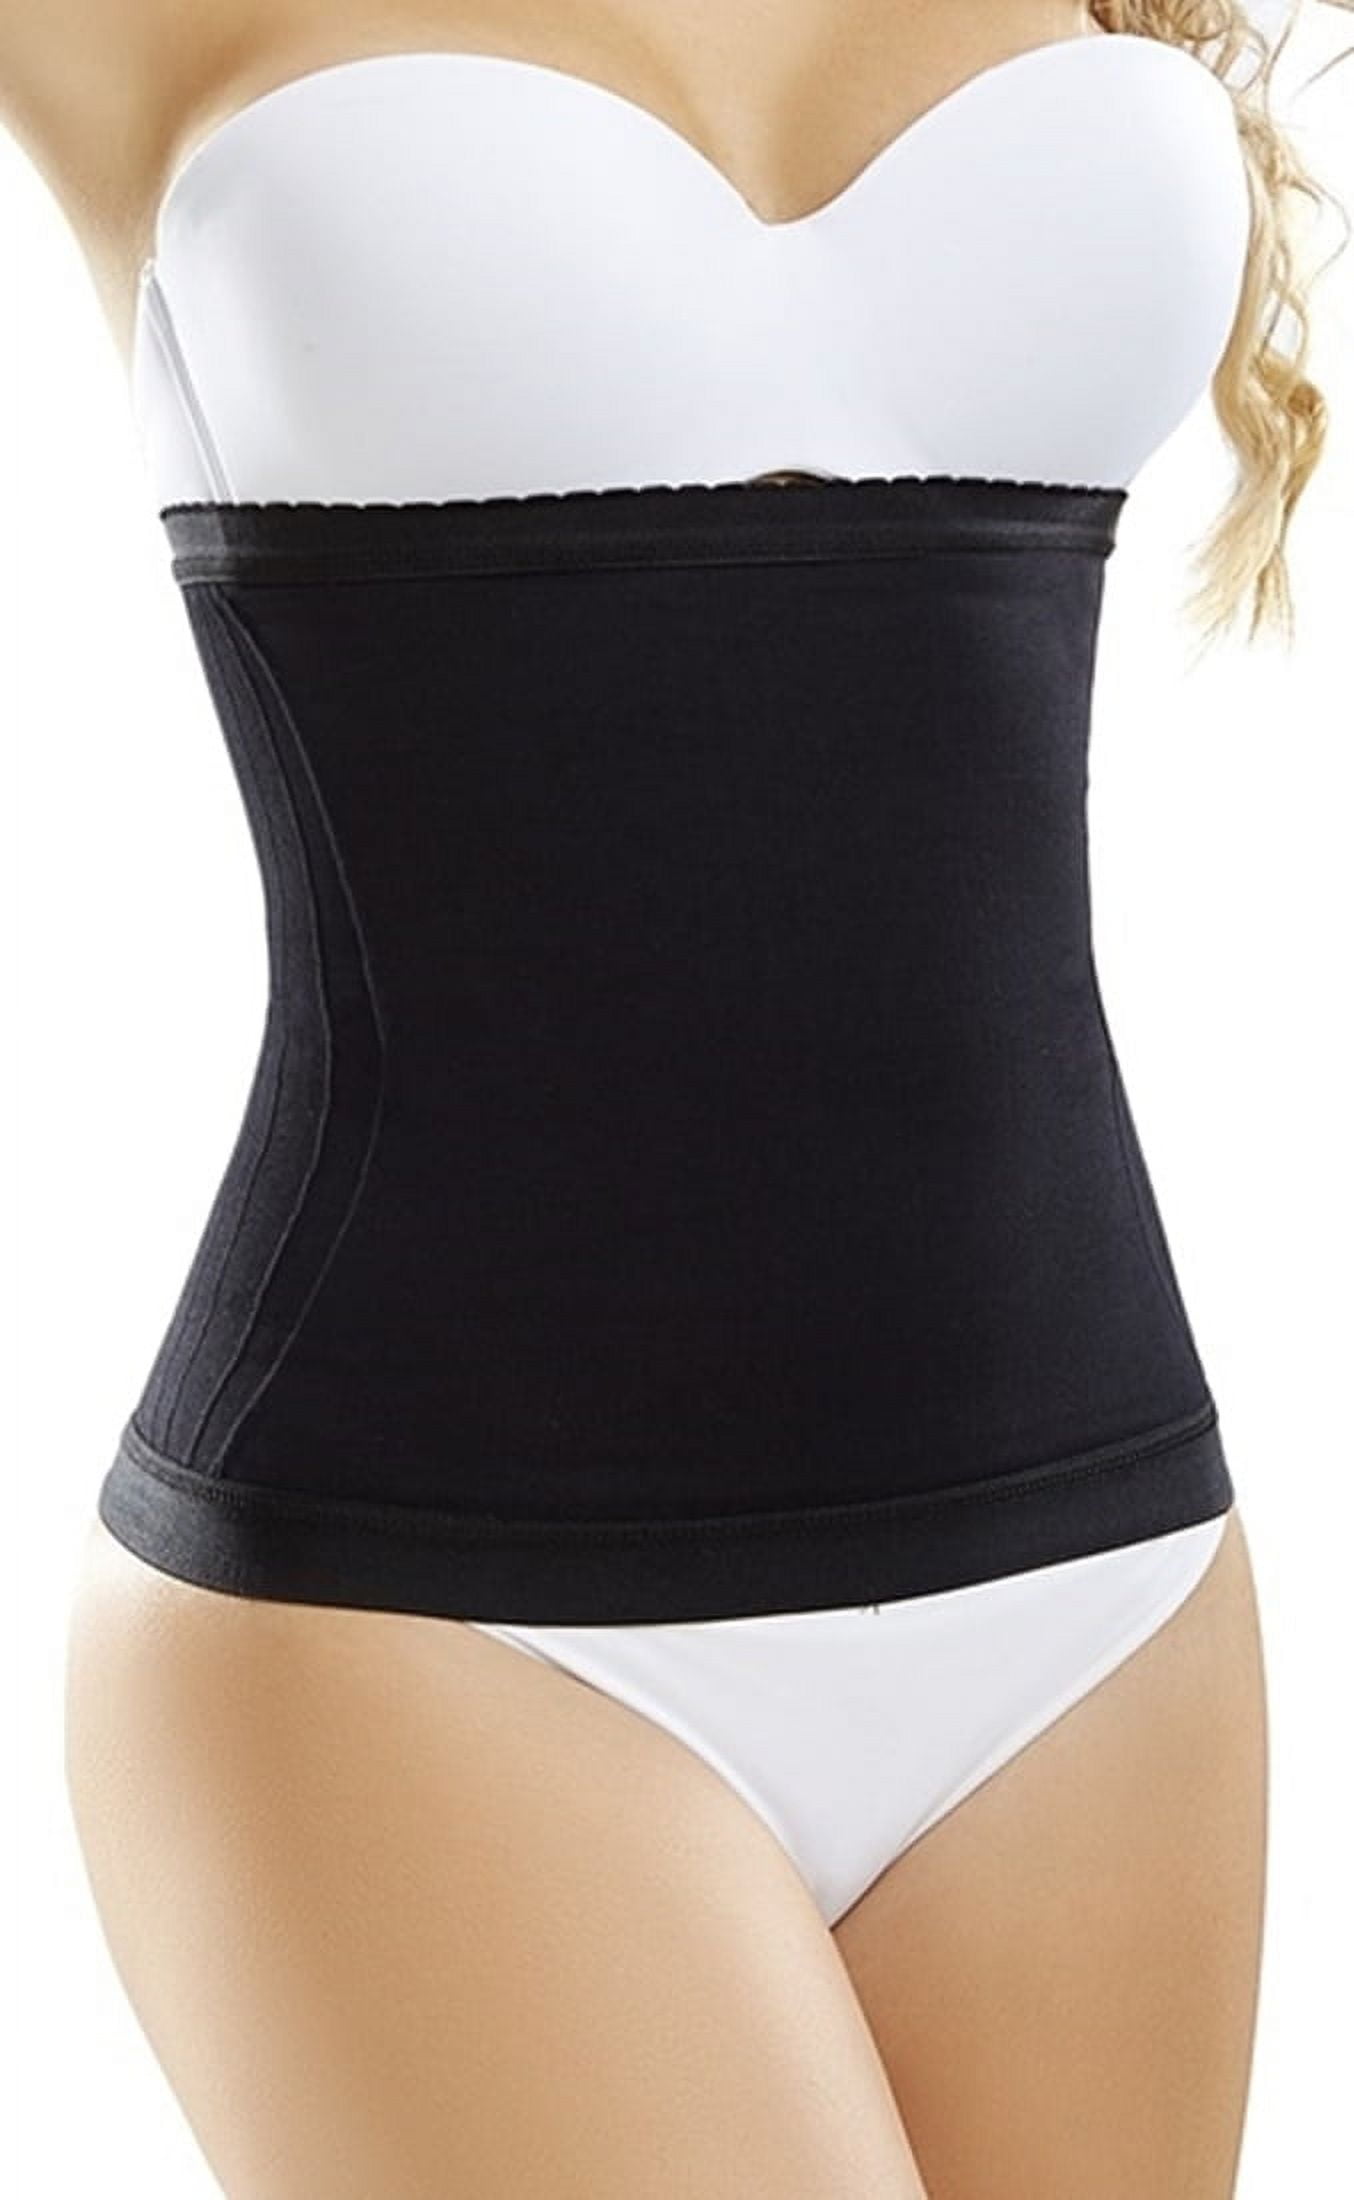 GABRIALLA Abdominal and Back Support Girdle, Shapewear Panties for Women